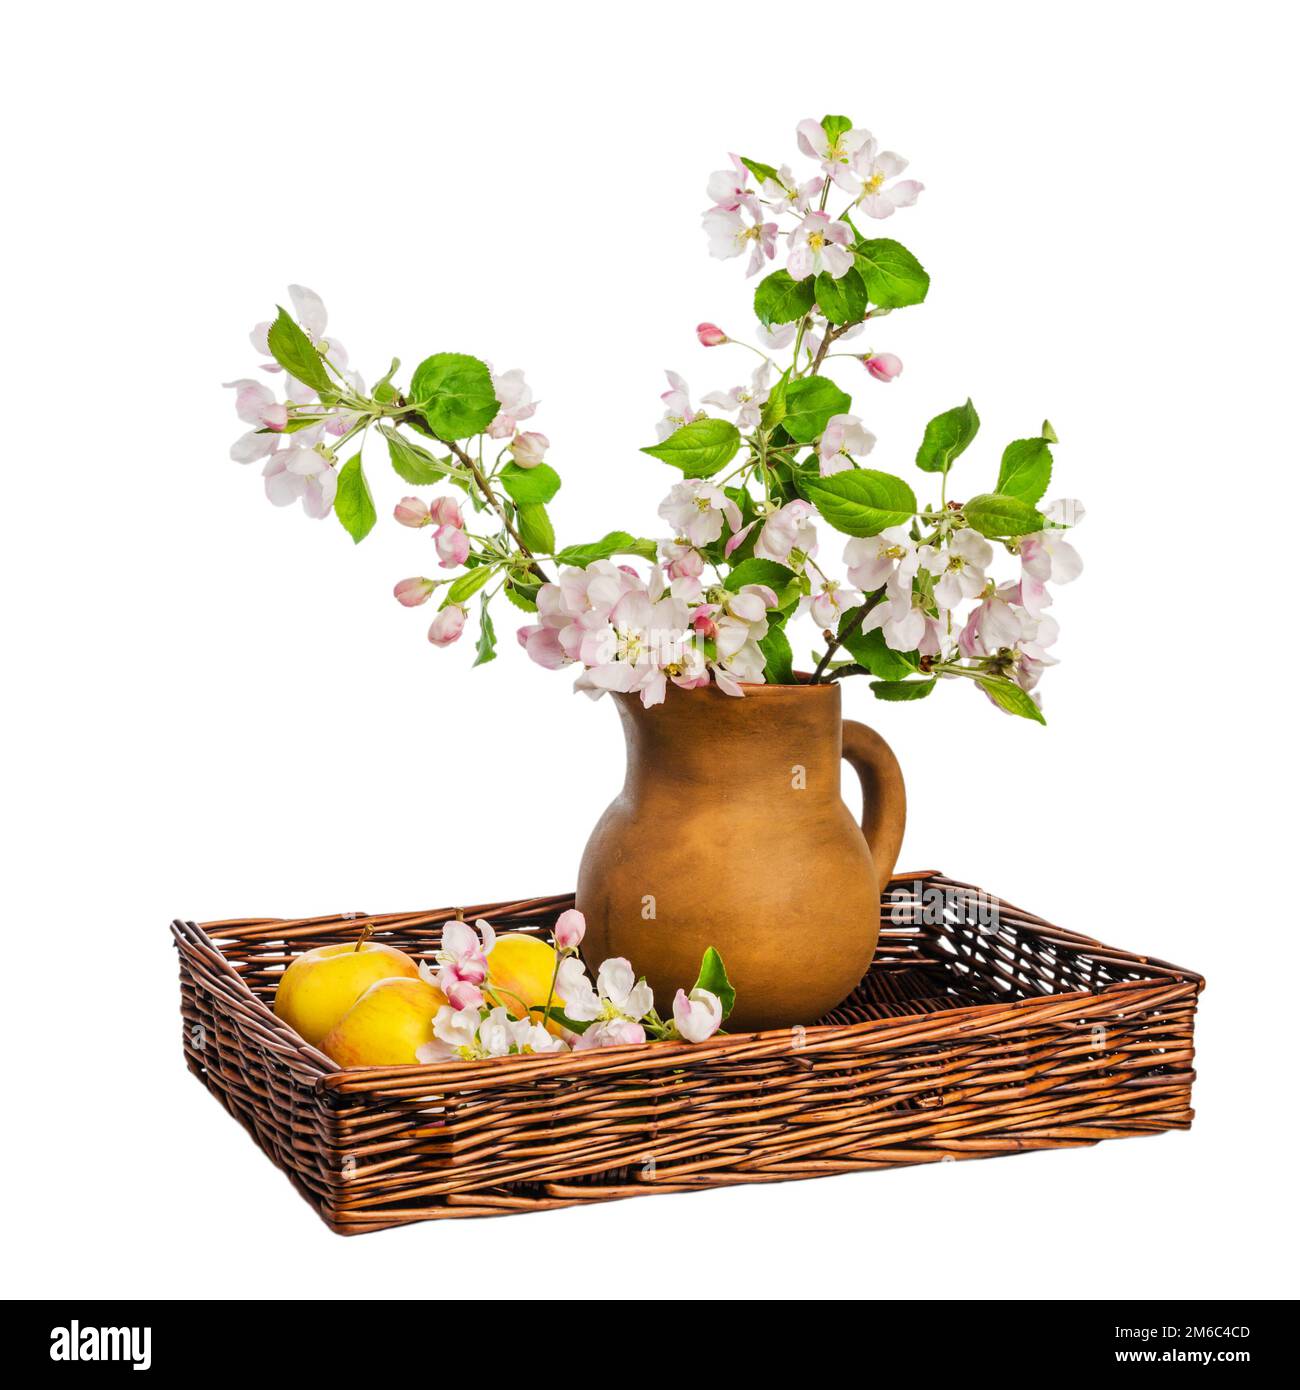 Branch of blossoming apple-tree in clay pitcher on white background, close-up Stock Photo